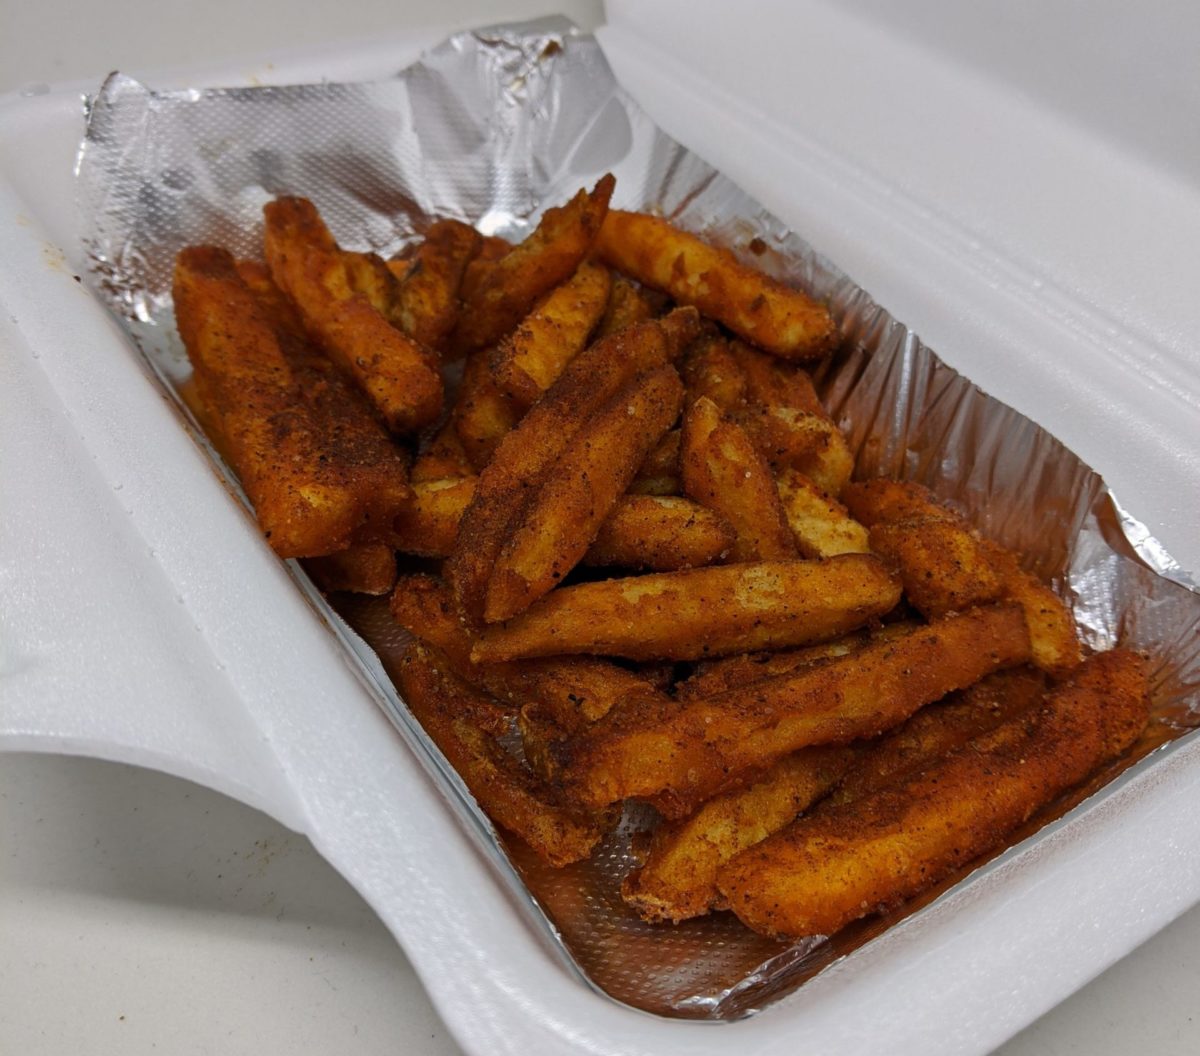 cajun fries at wing snob by fartley farms